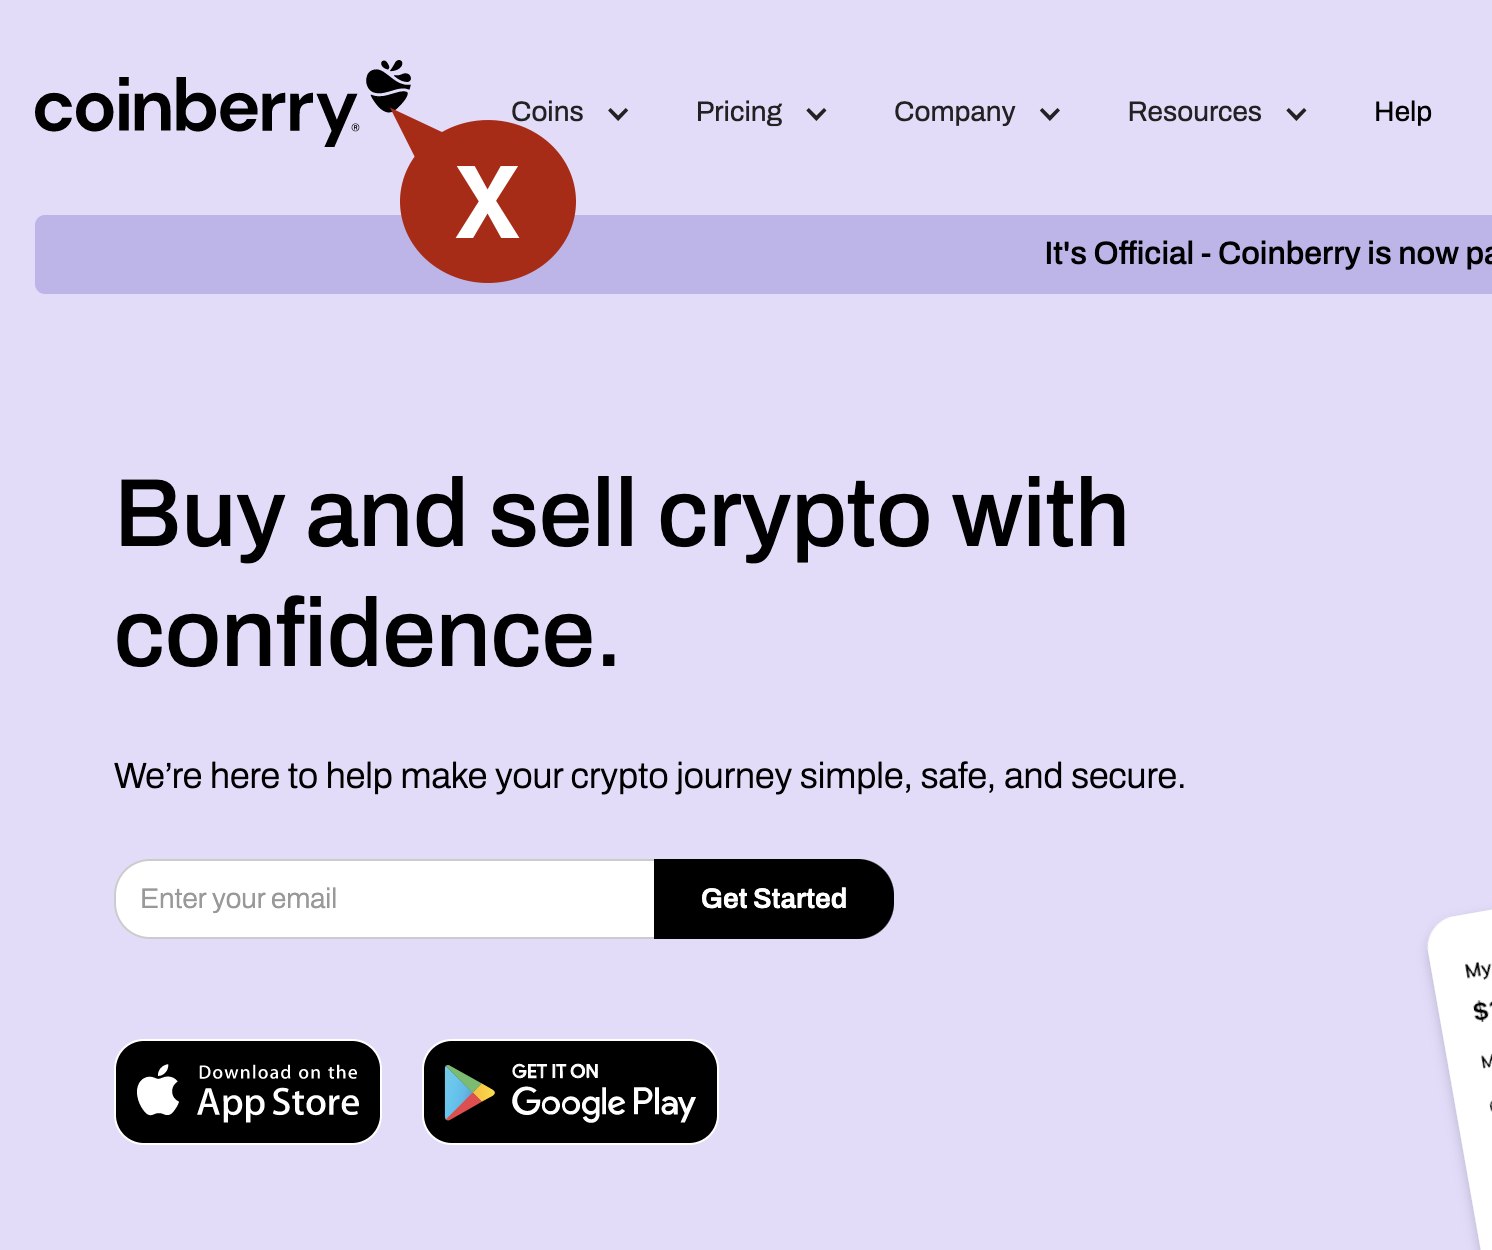 Coinberry is not a good choice